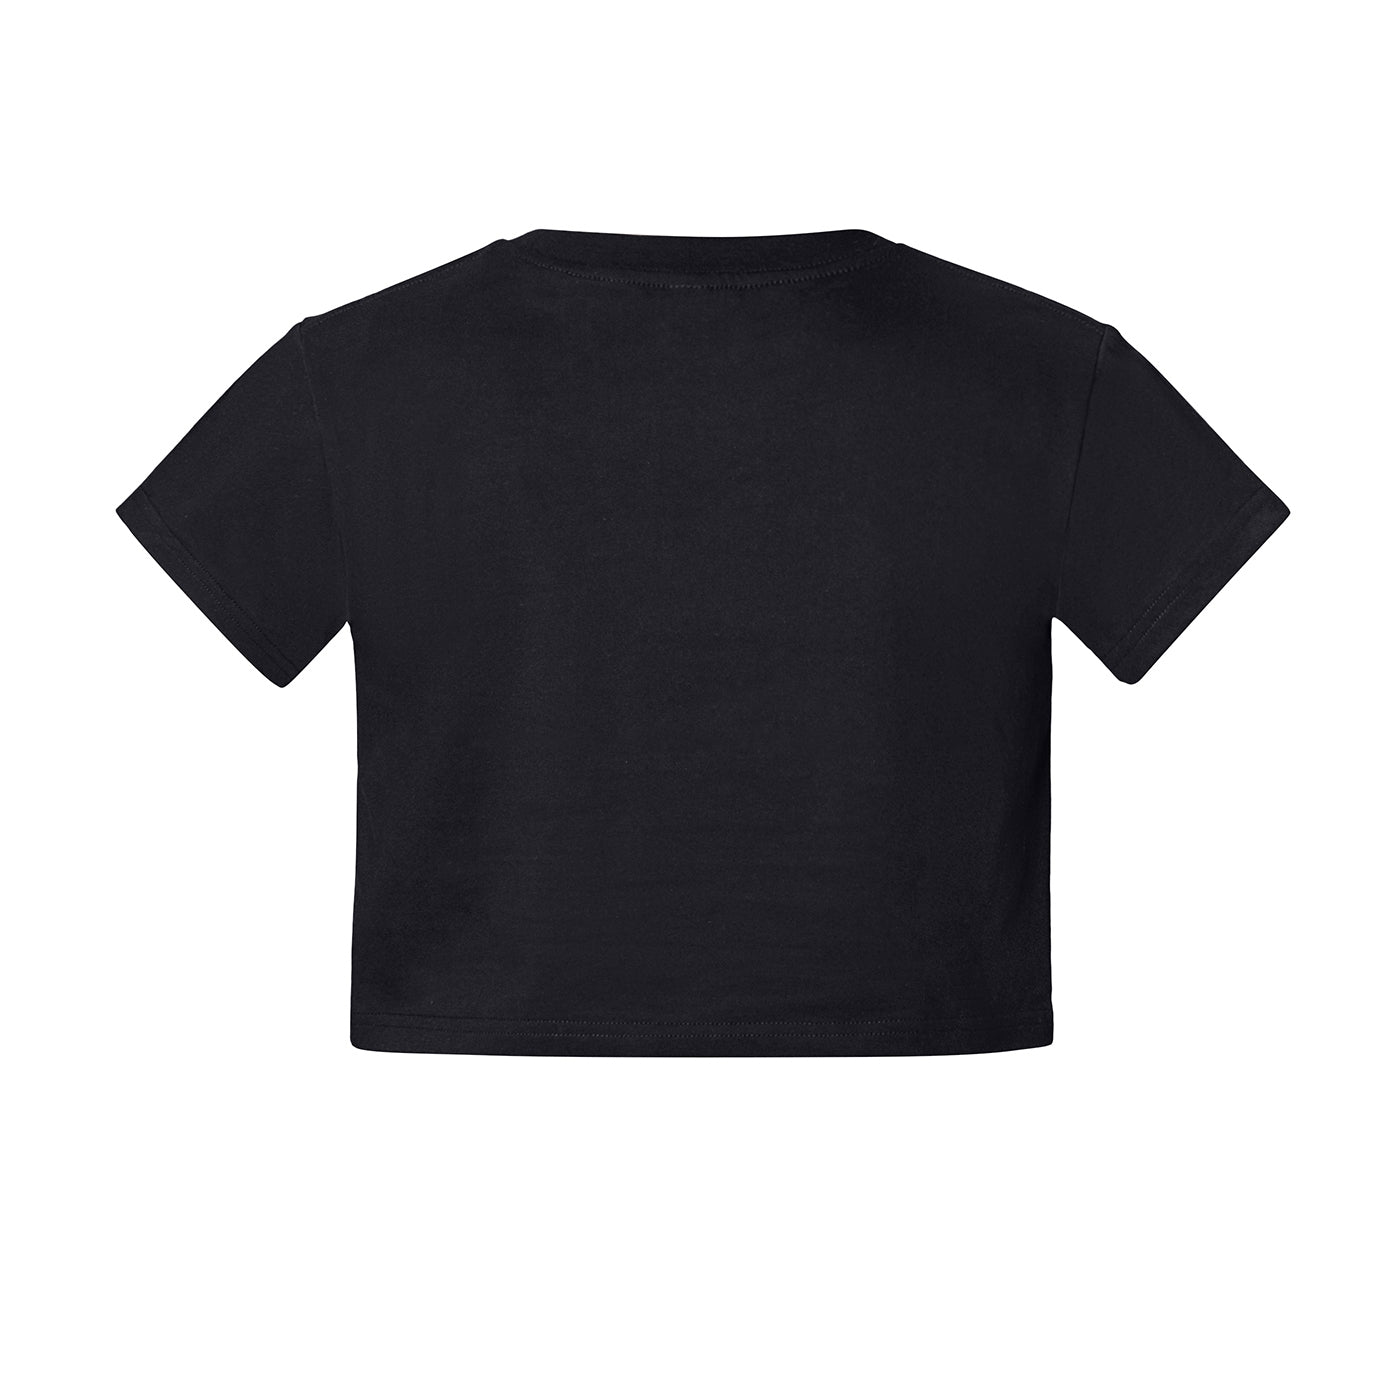 Graphic Parker Cropped Tee - Available in Black or Candy